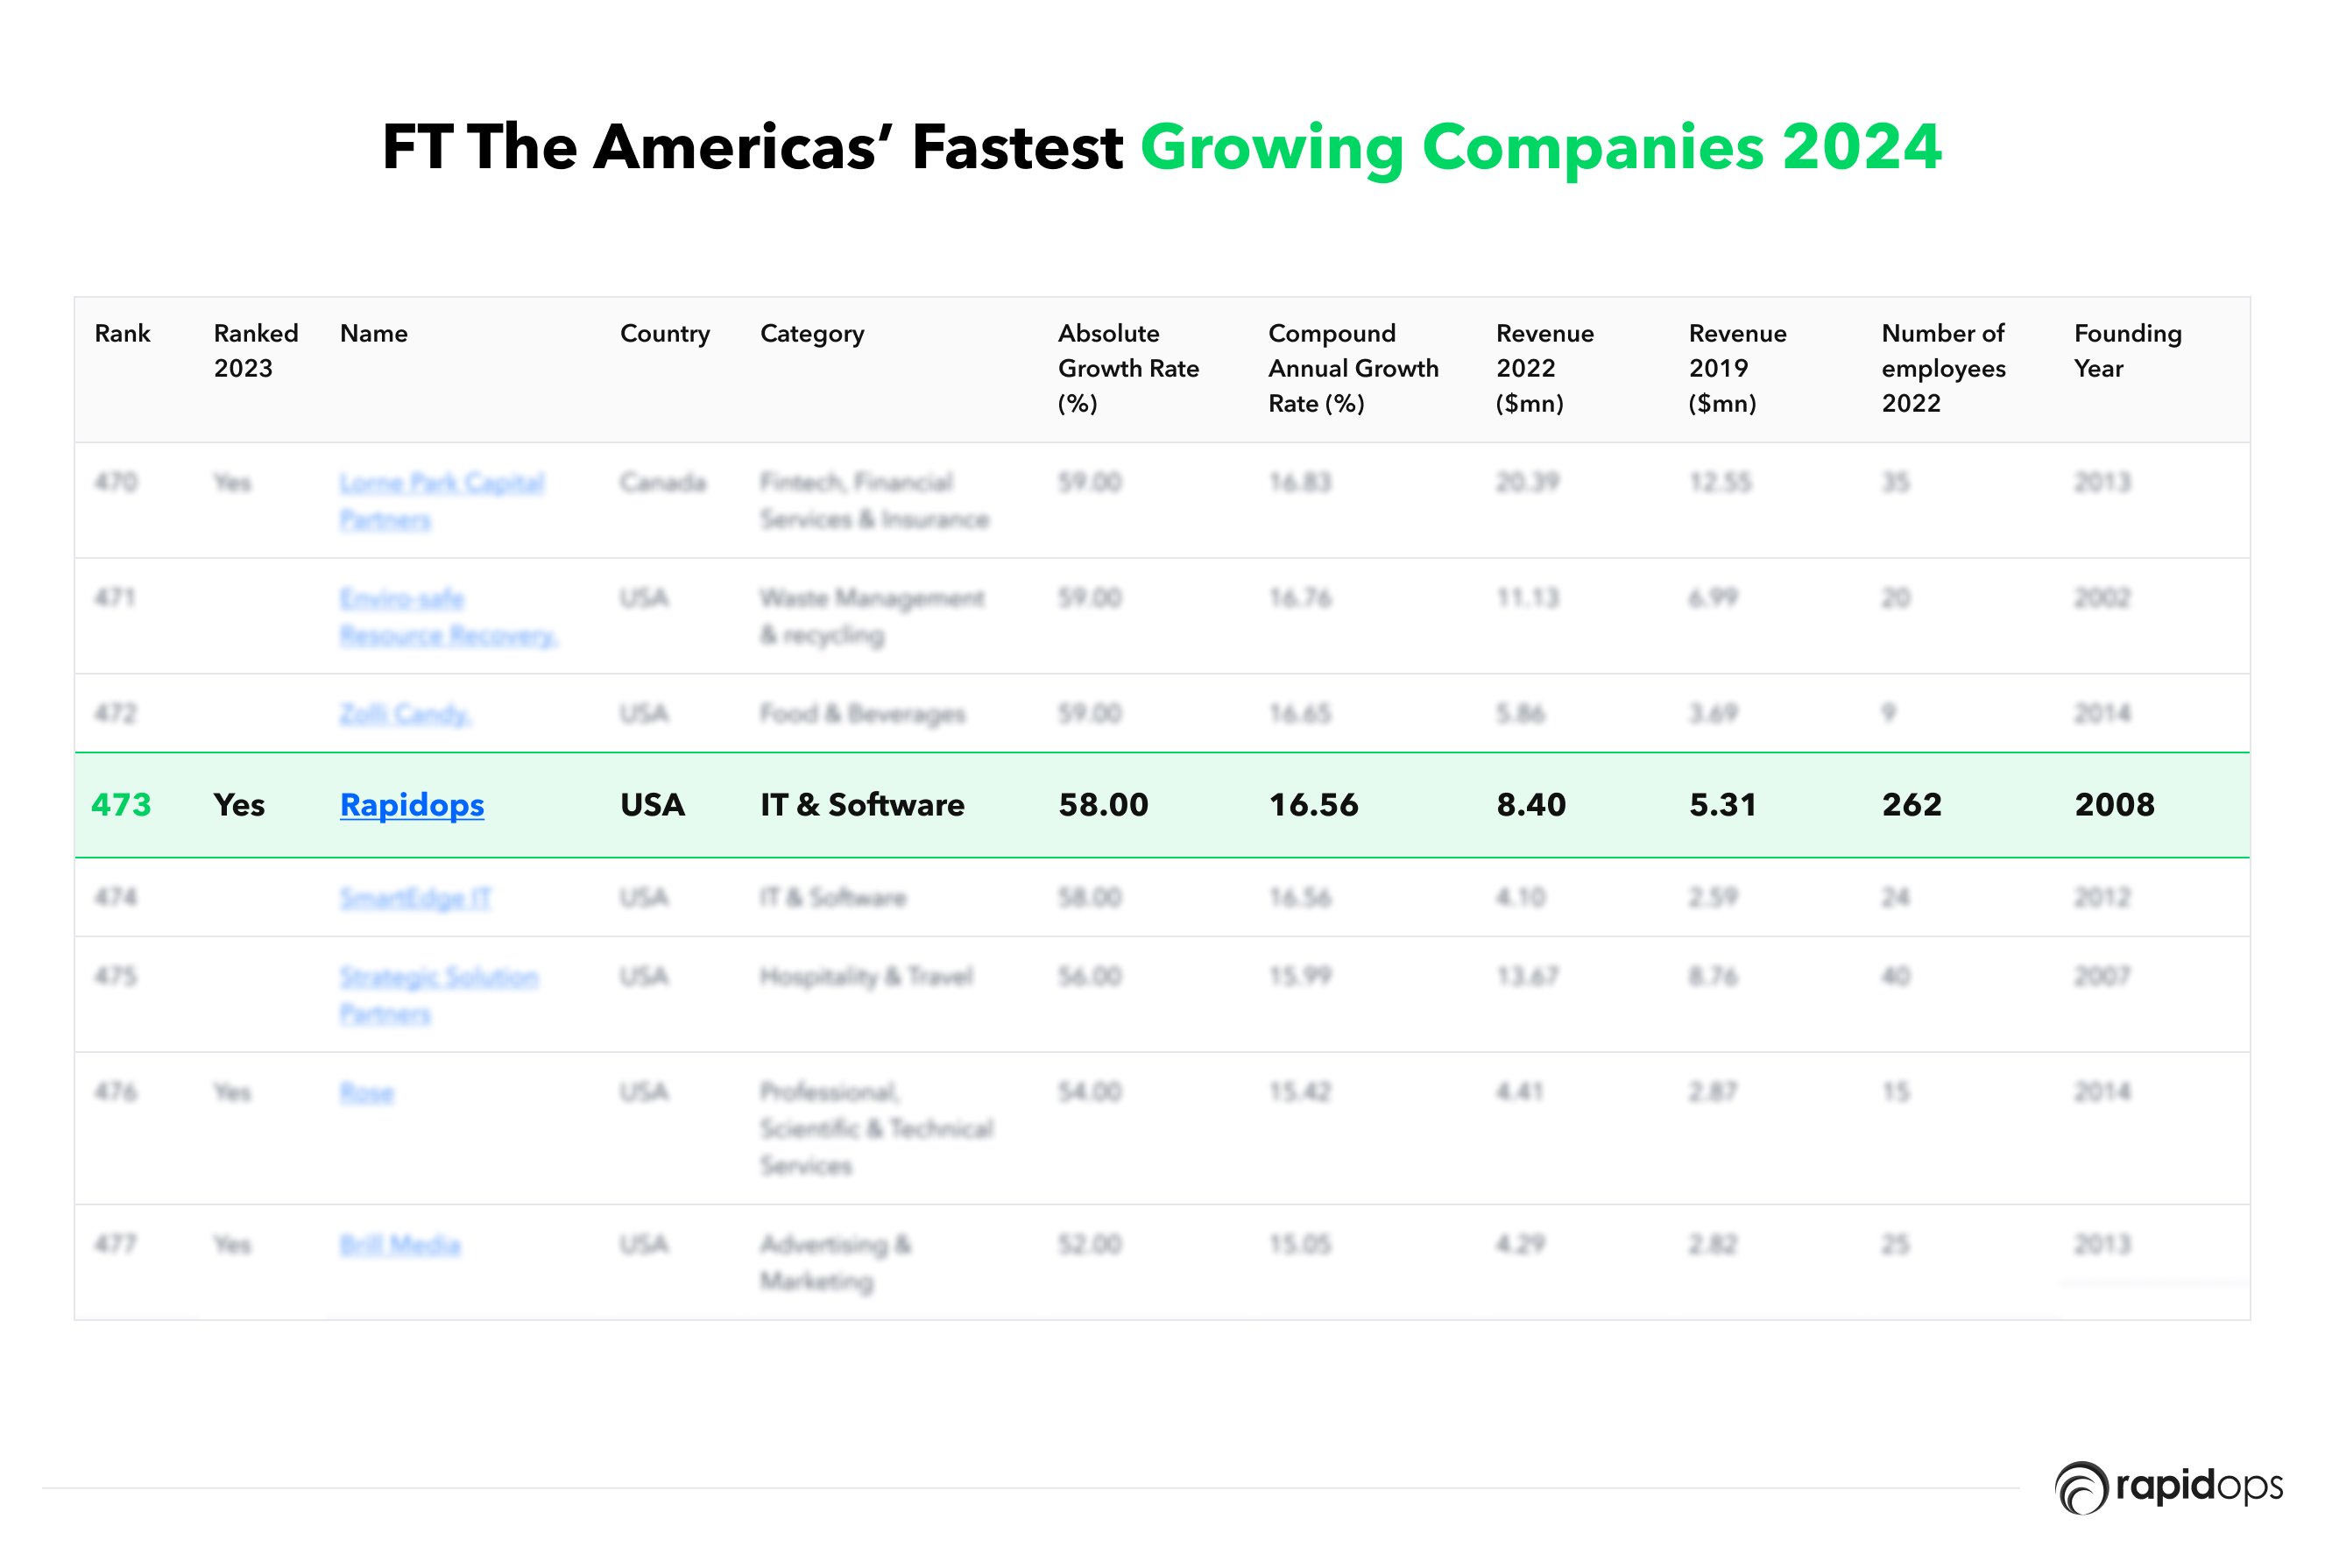 FT The Americas Fastest Growing Companies 2024 - Table